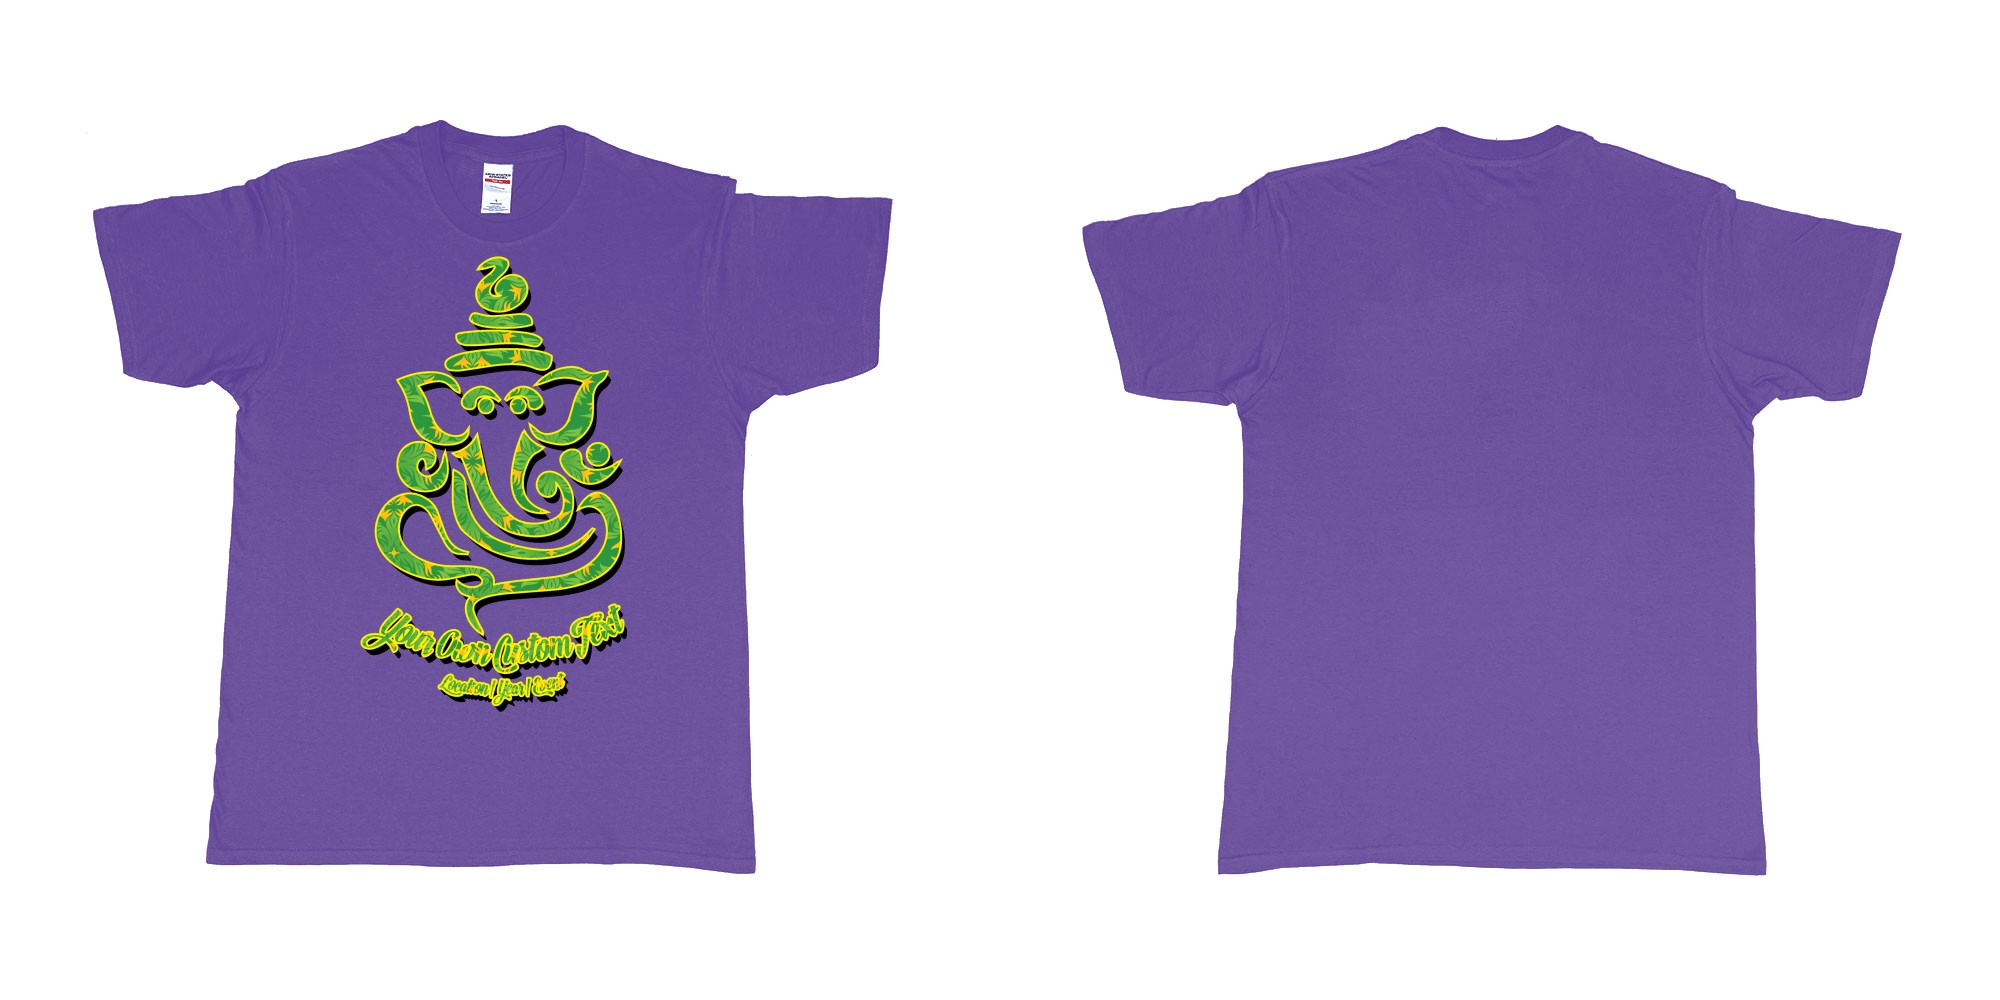 Custom tshirt design ganesh soft jungle yoga customize own design in fabric color purple choice your own text made in Bali by The Pirate Way